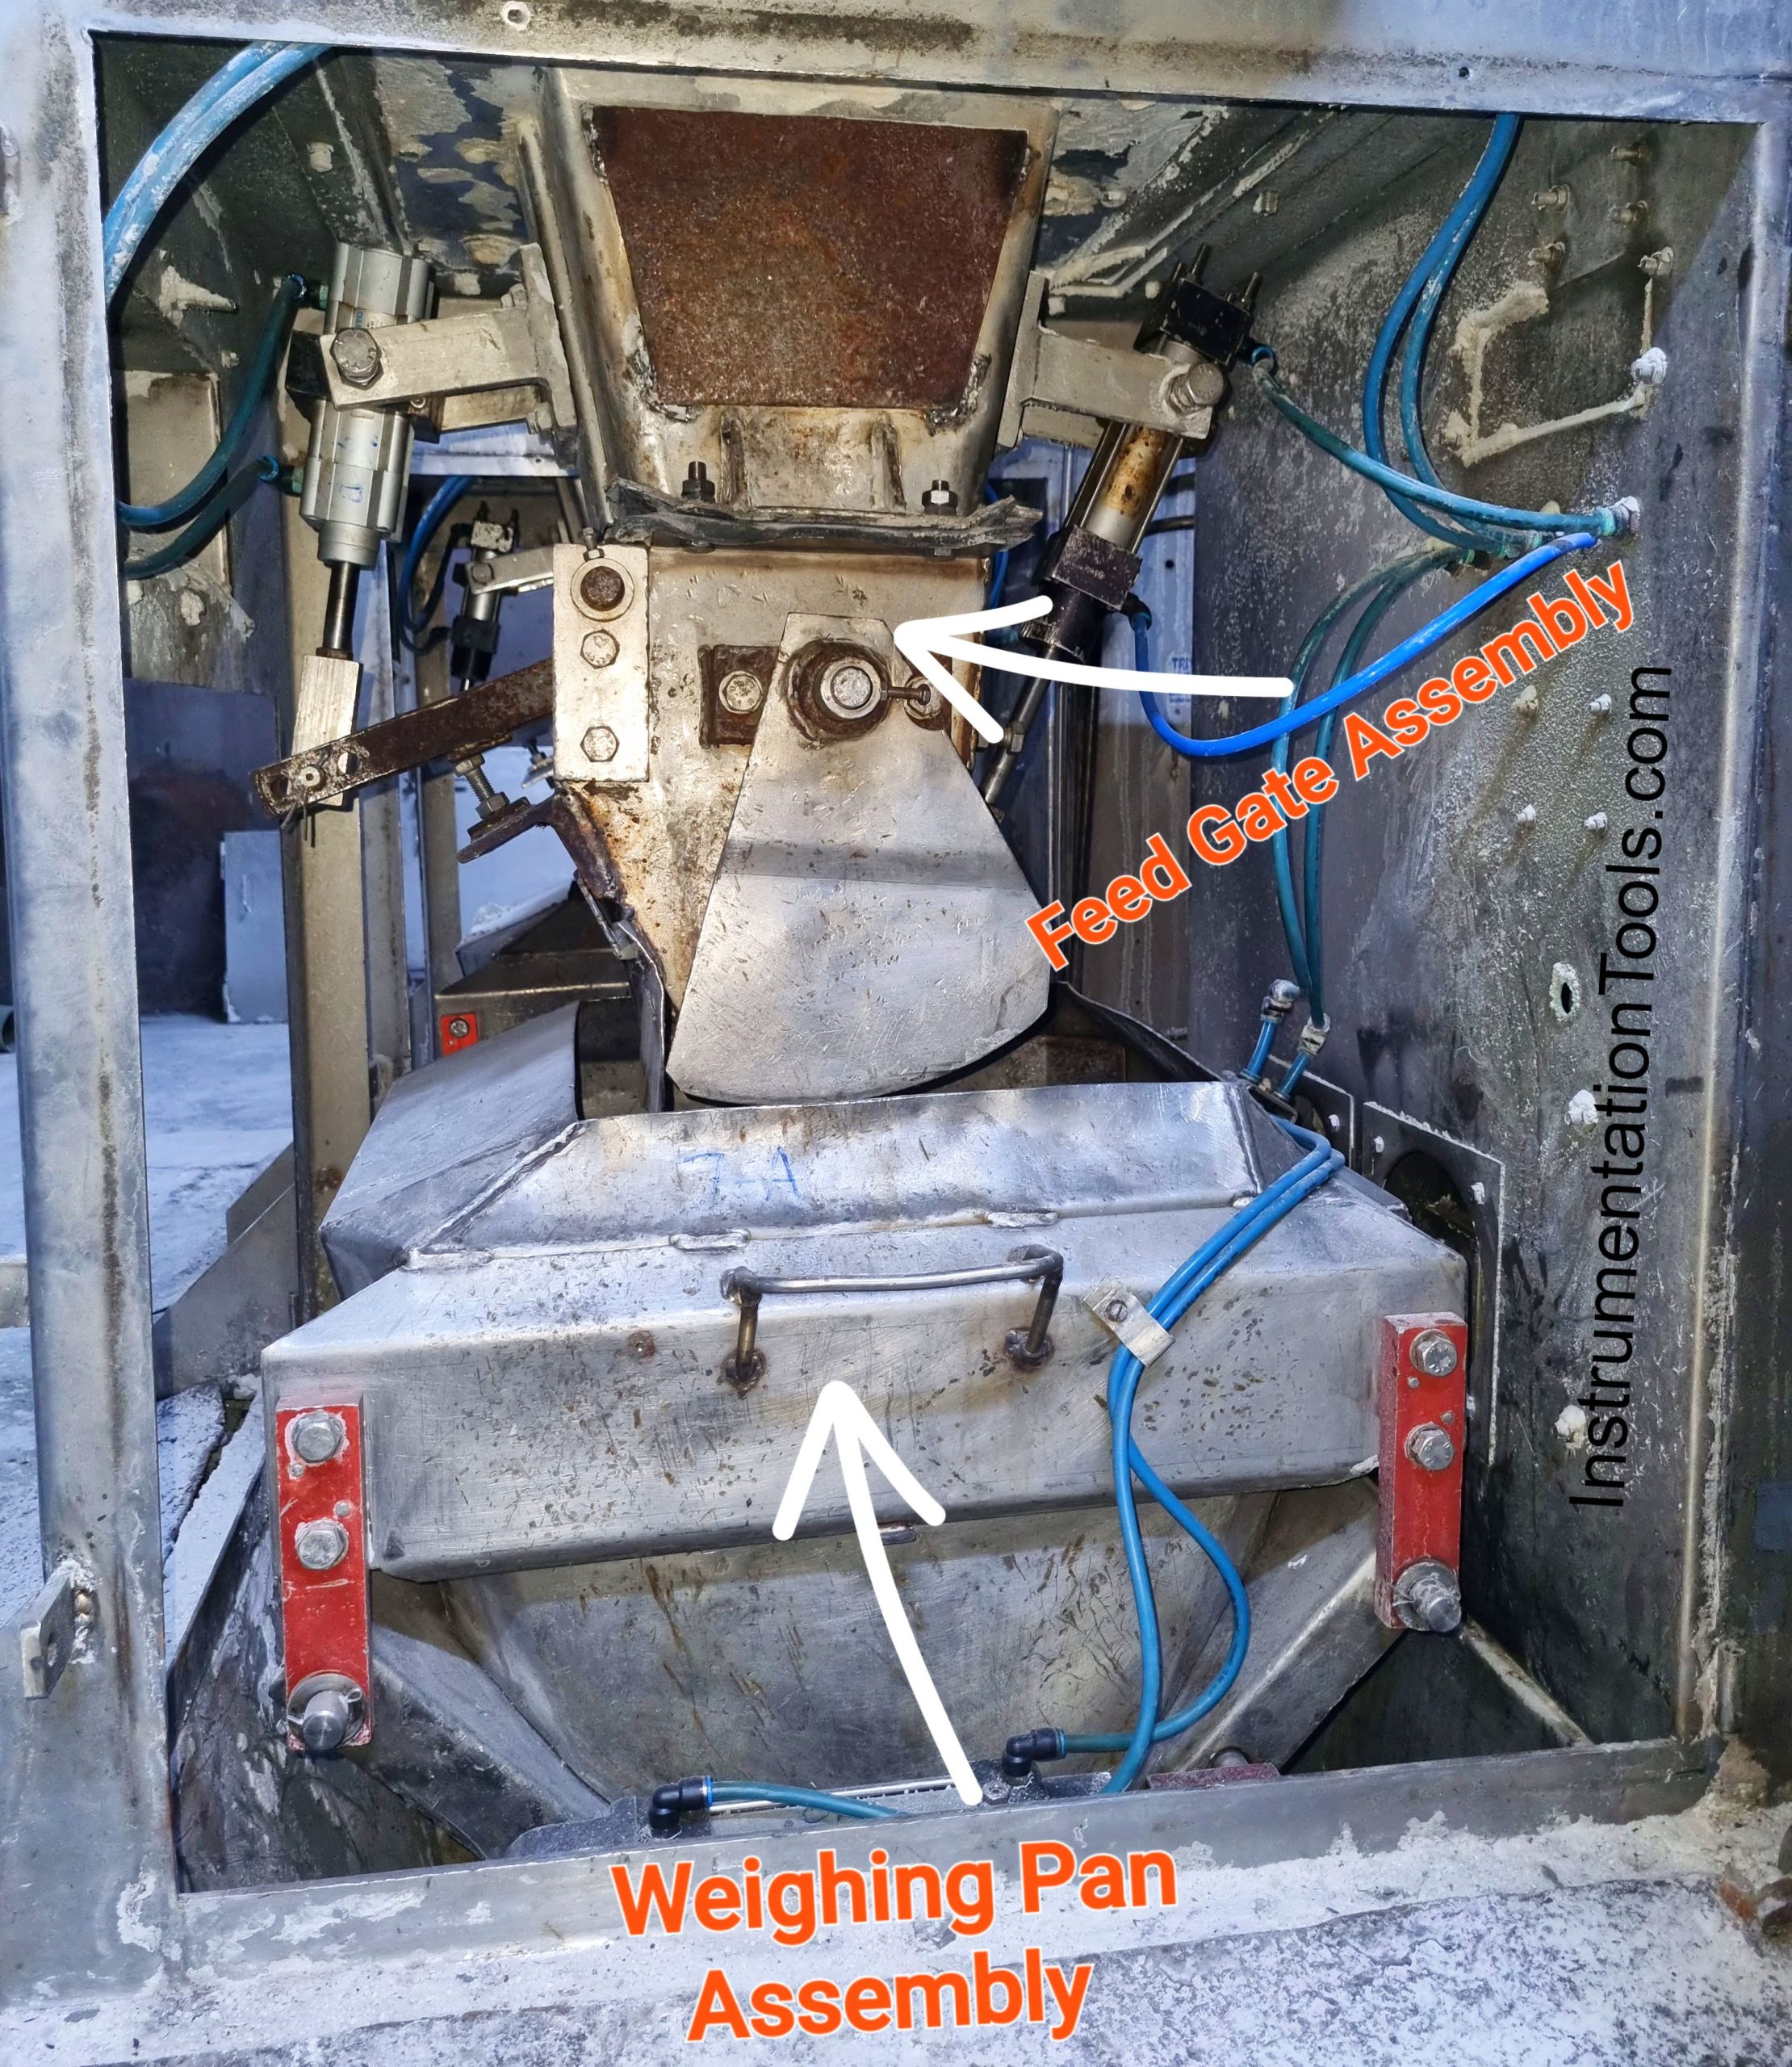 Weighing Pan Assembly